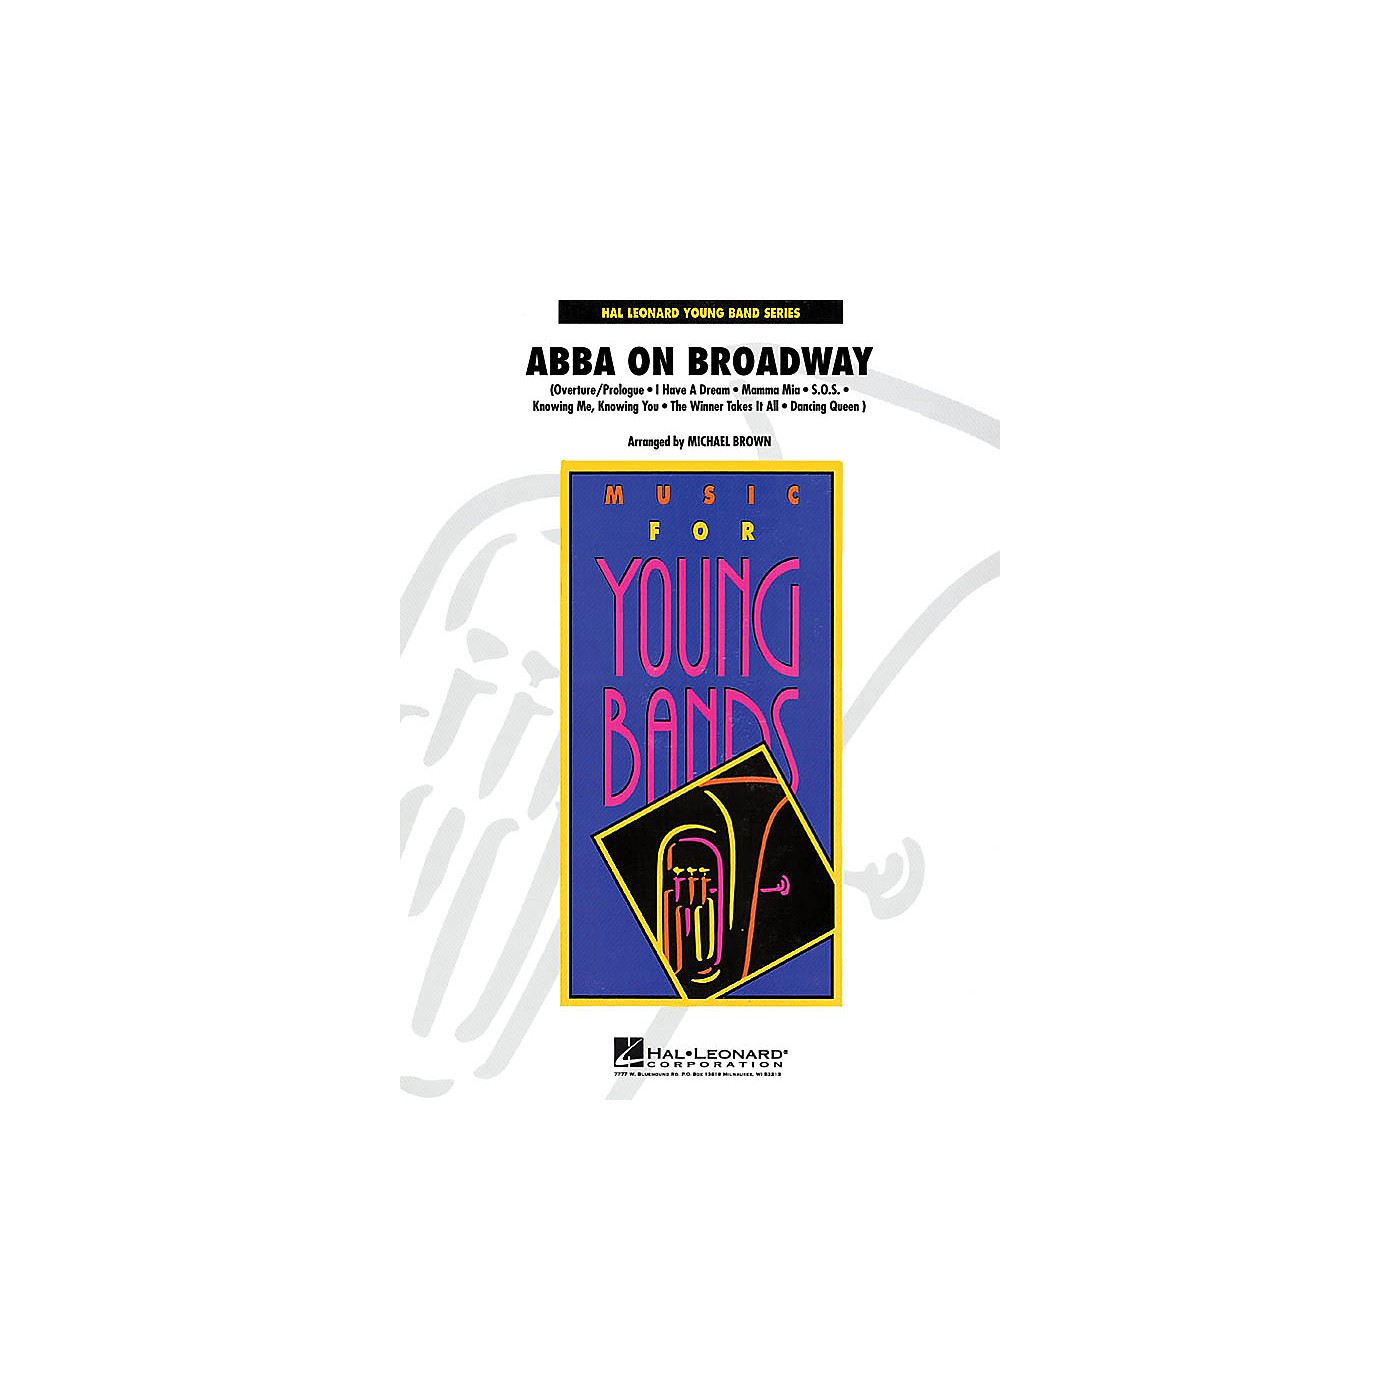 Hal Leonard ABBA on Broadway - Young Concert Band Series Level 3 arranged by Michael Brown thumbnail